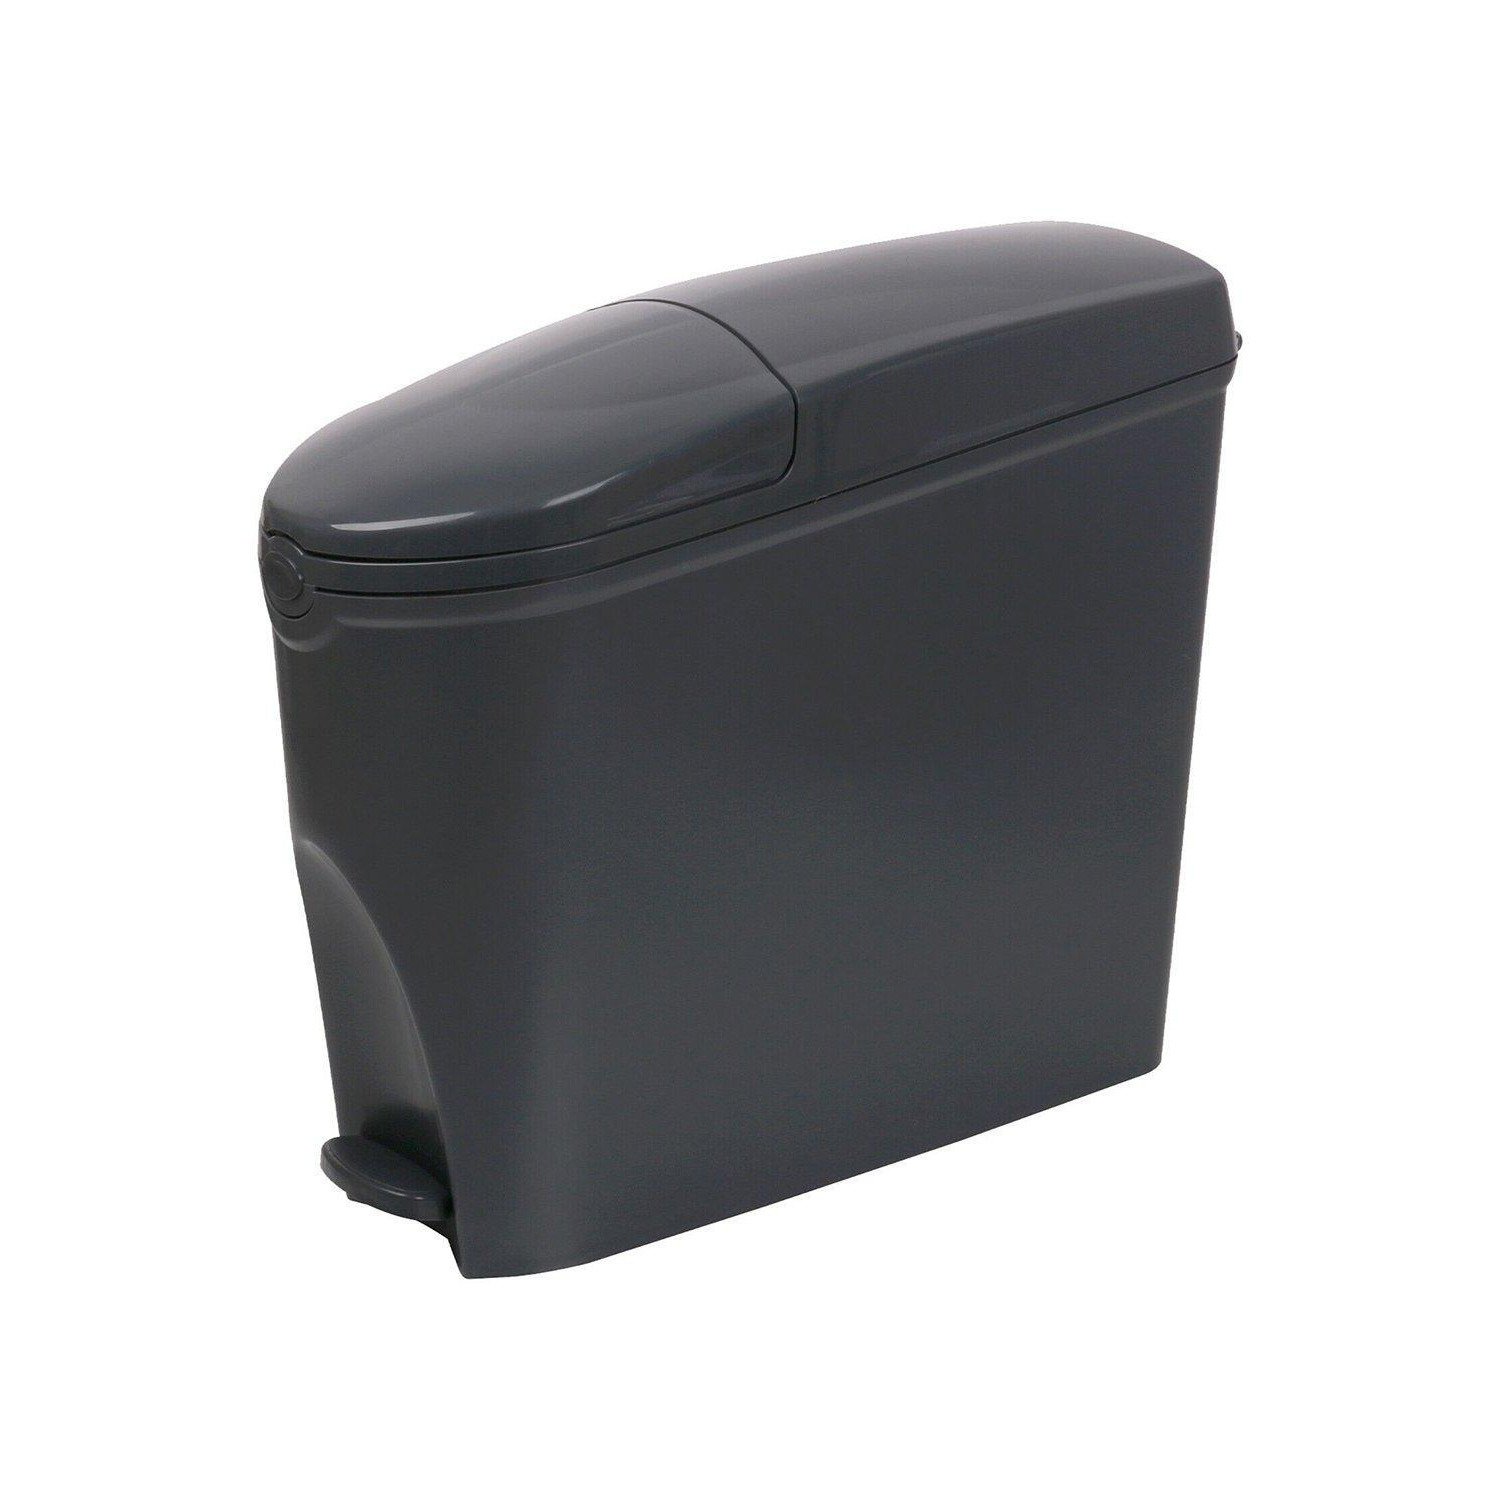 Grey Pedal Operated Toilet Sanitary Bin 20 Litre Capacity - image 1